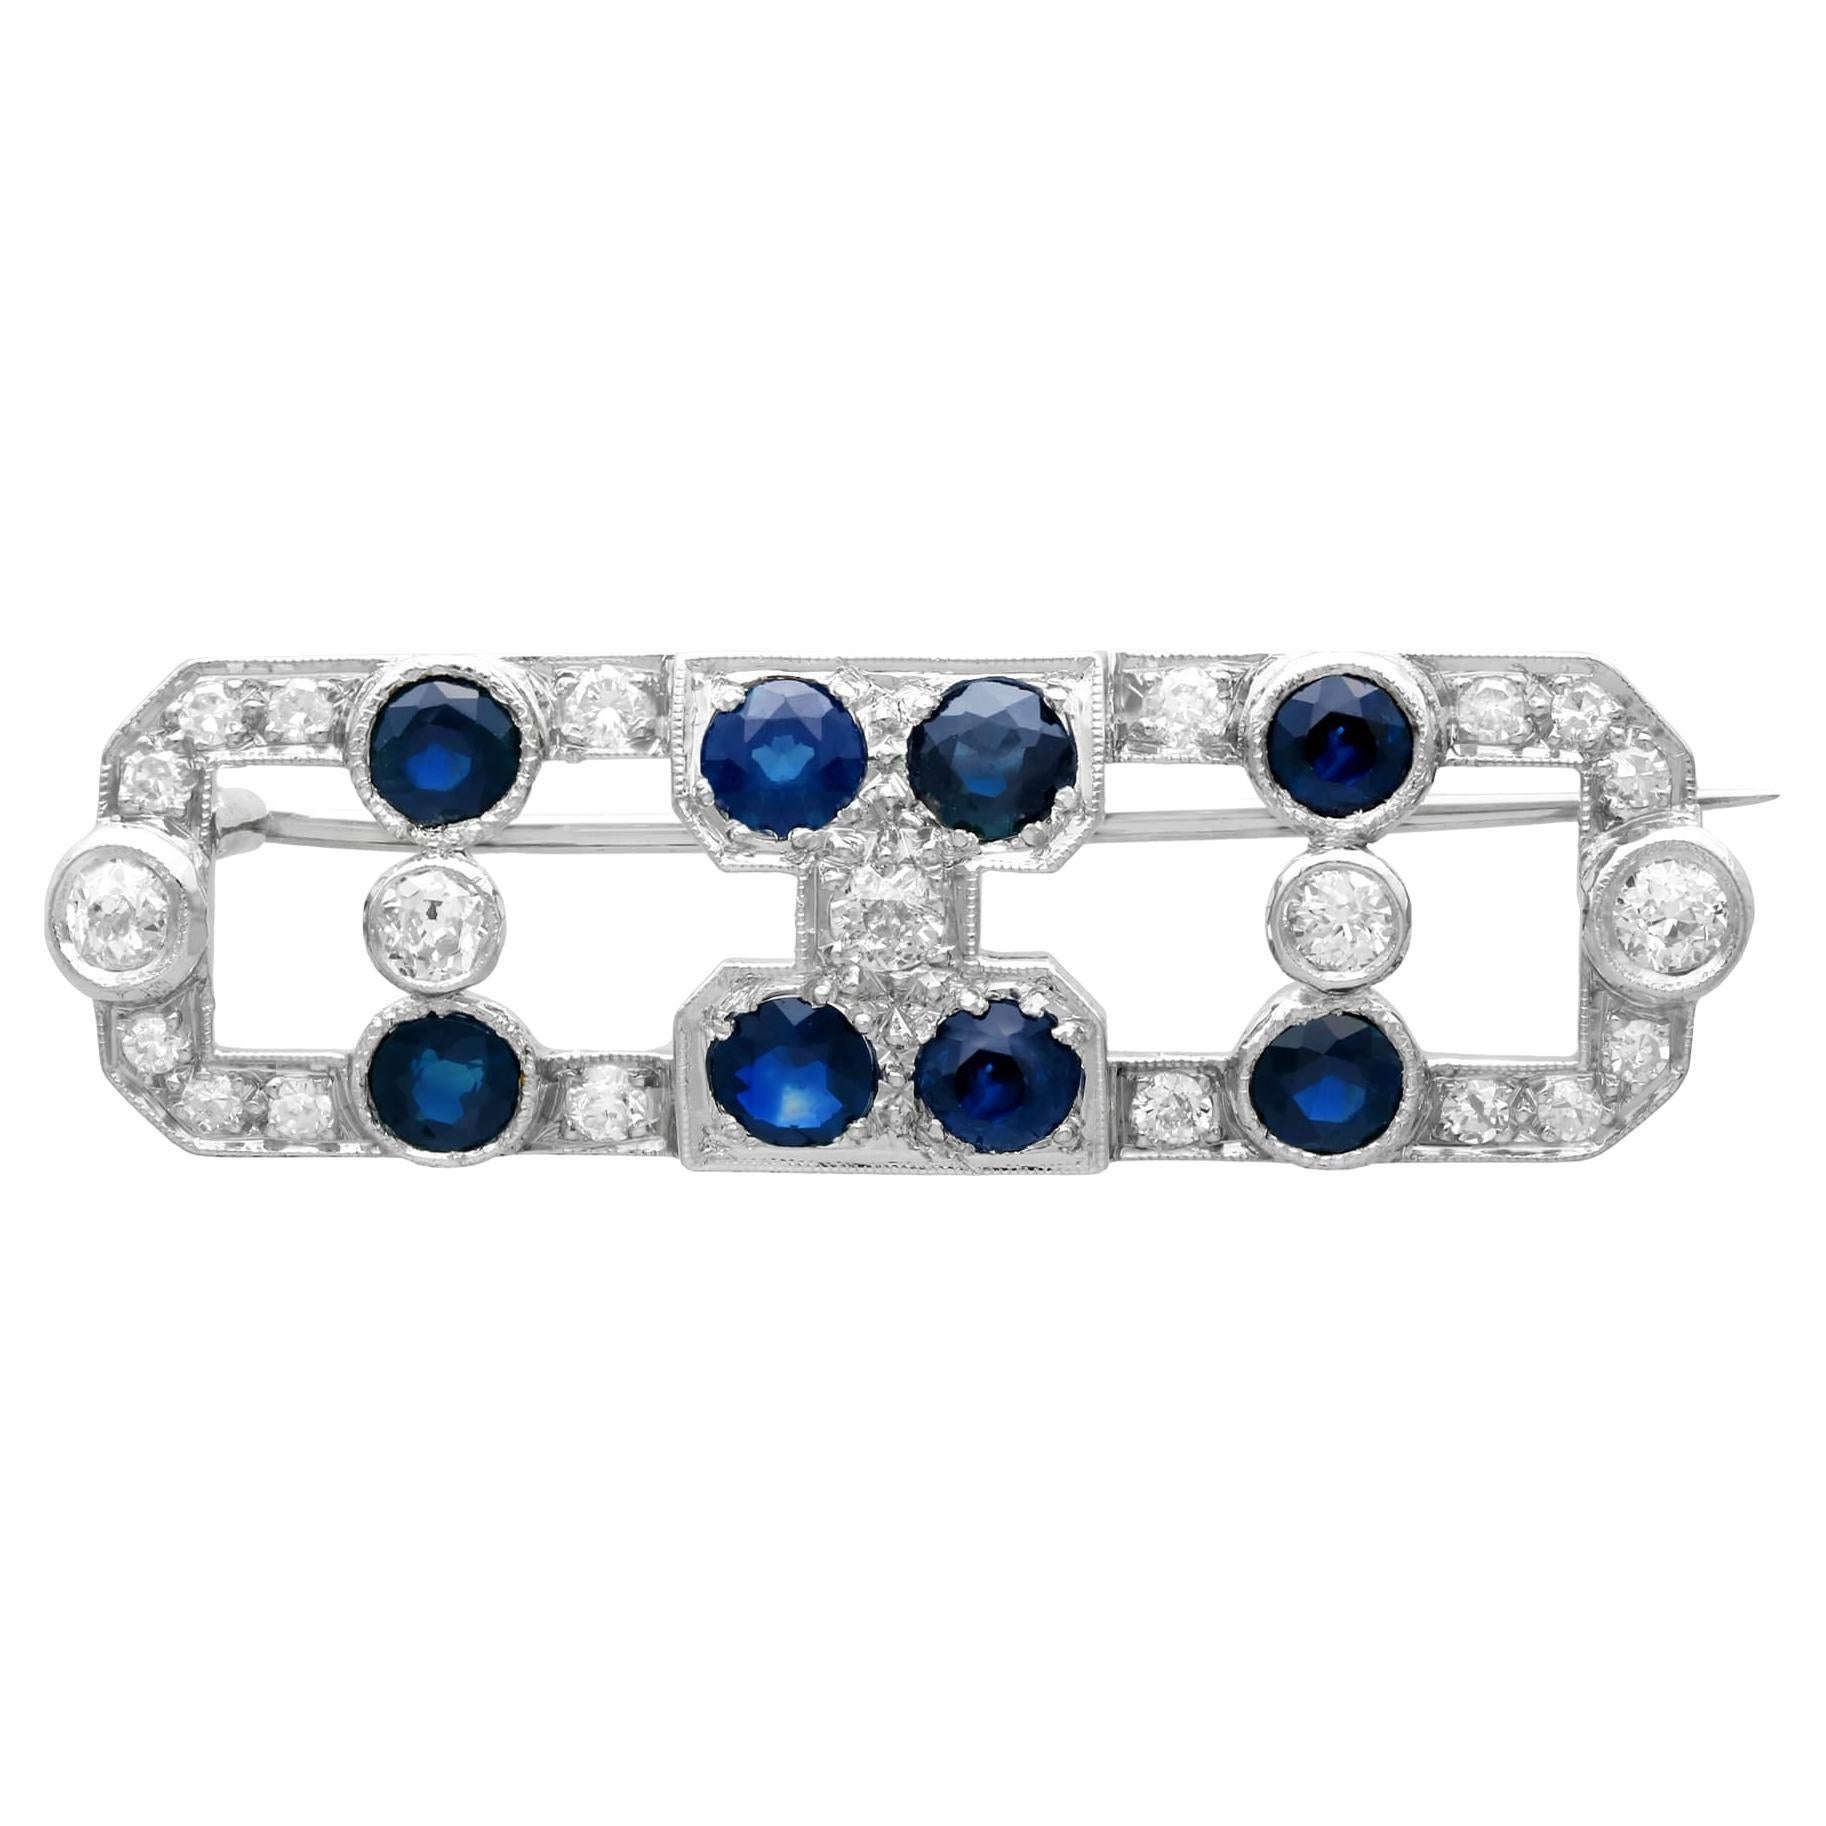 Art Deco 1920s 3.20 Carat Sapphire and 1.70 Carat Diamond White Gold Brooch For Sale